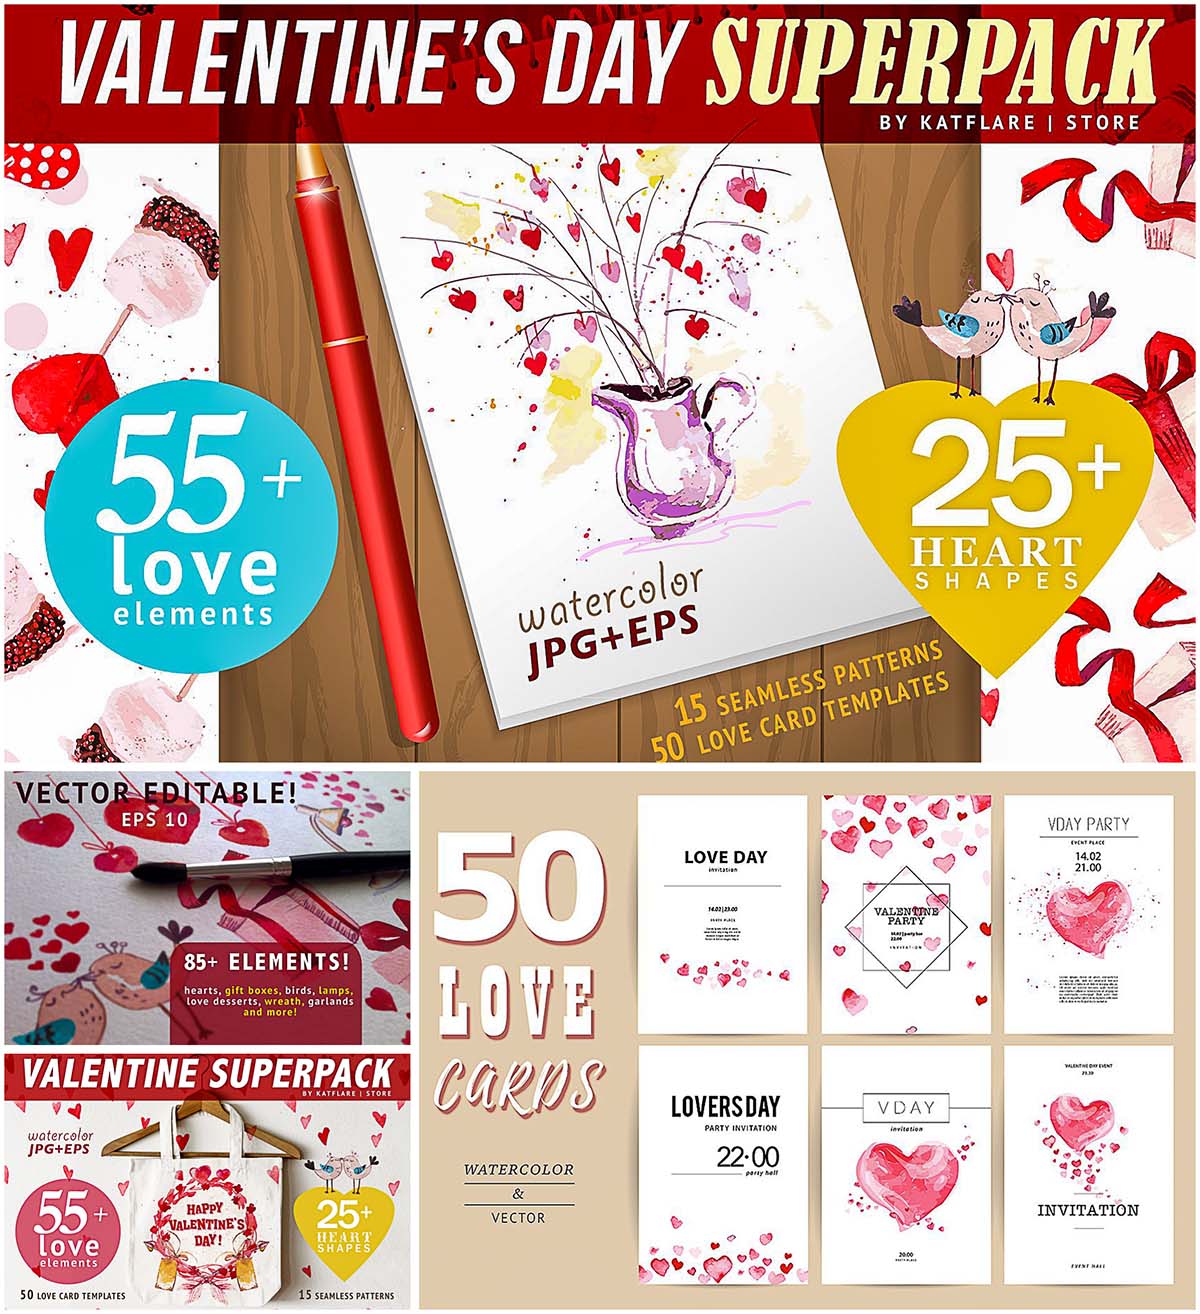 Valentines day superpack